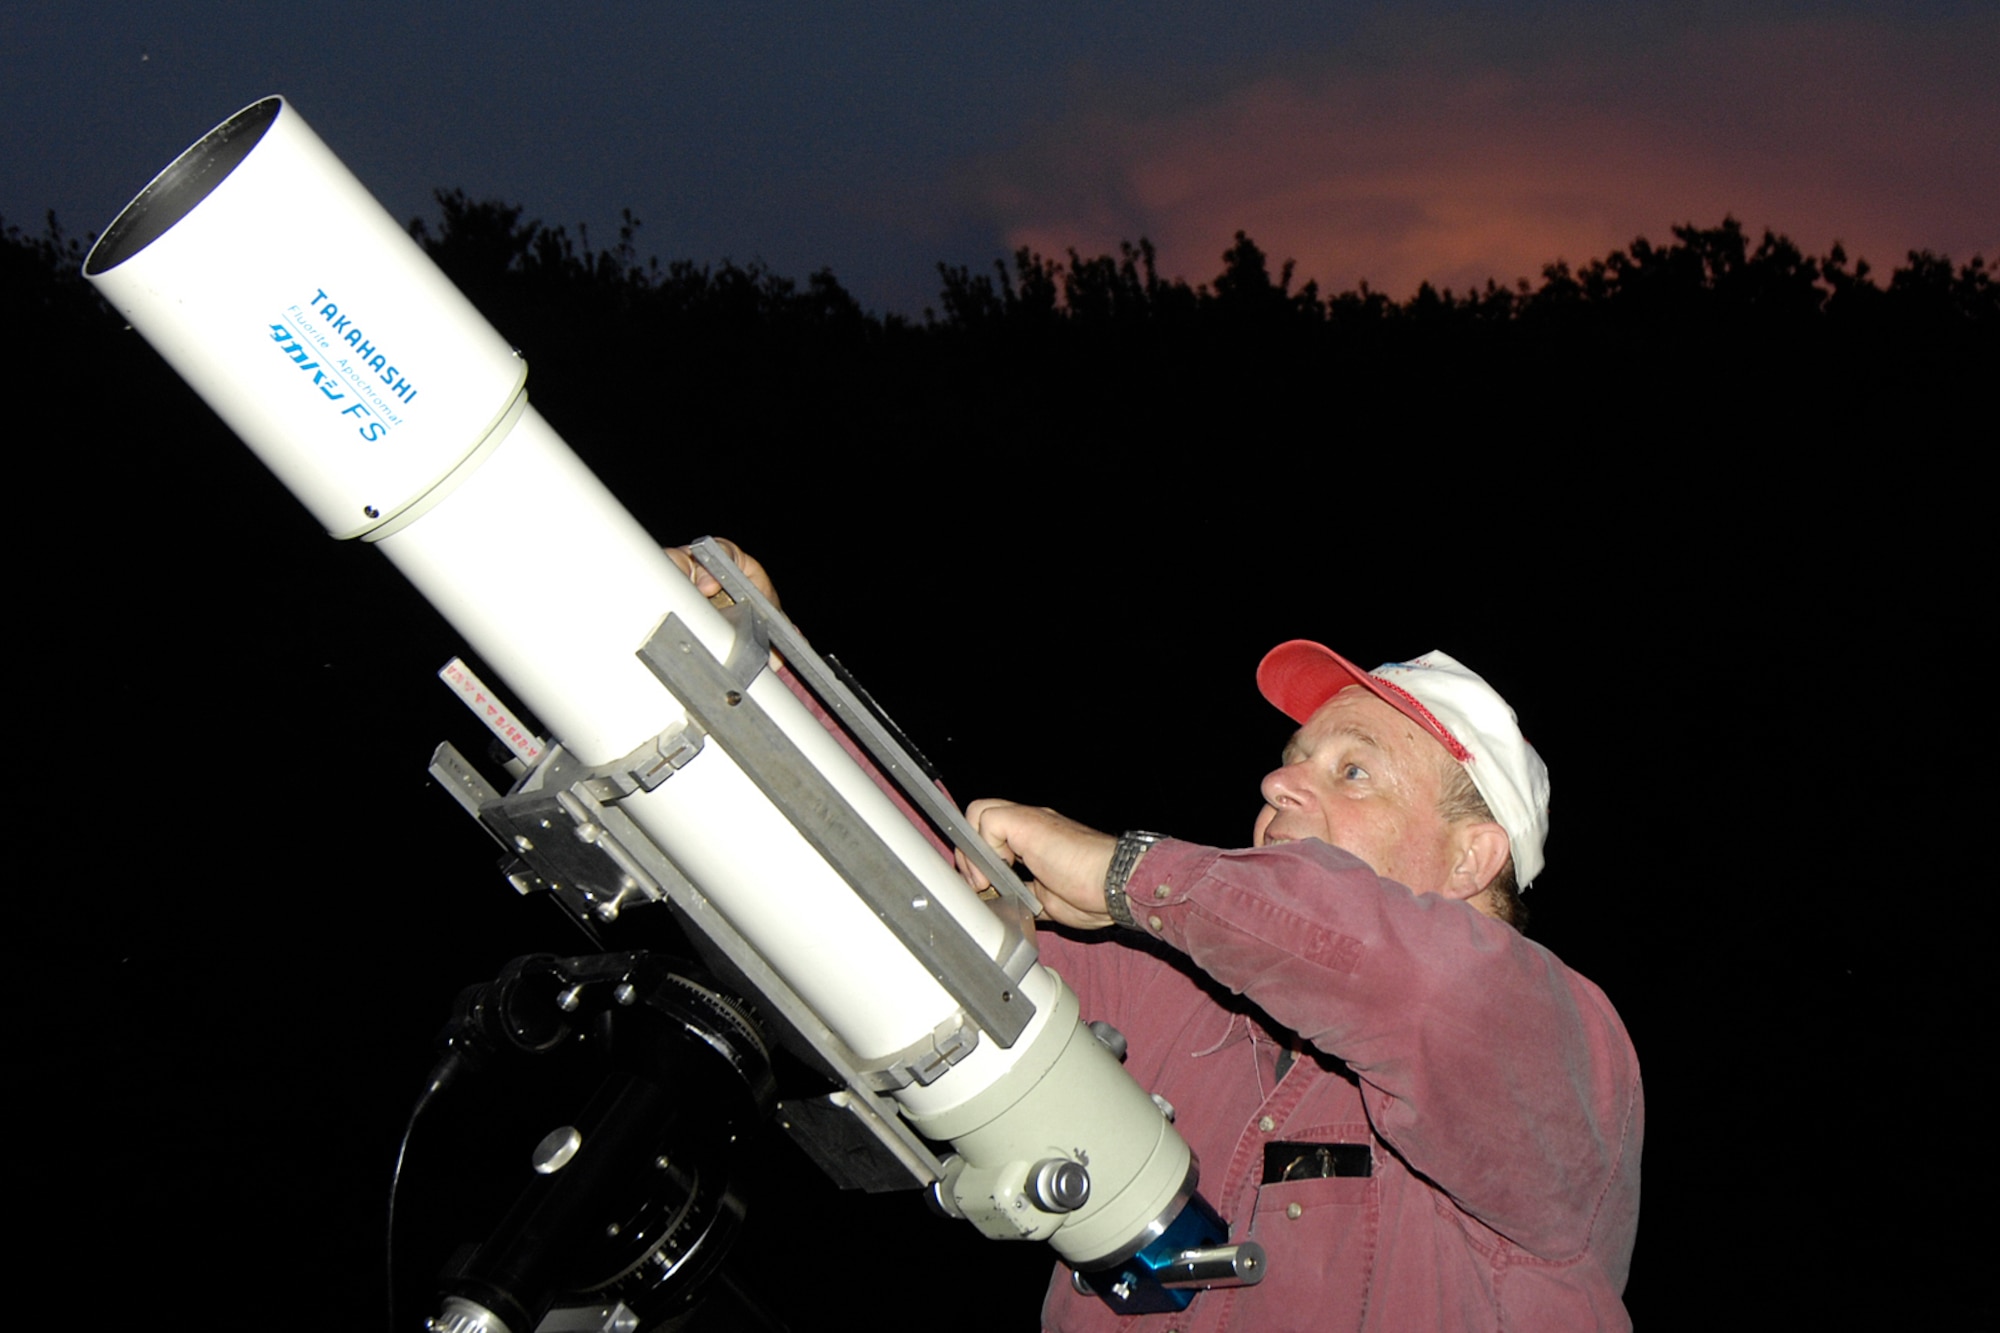 HANSCOM AFB, Mass. -- John Blomquist, member of the Boston Amateur Telescope Makers club, uses a telescope during Astronomy Night June 7. The event, which began at the Youth Center, helped participants learn about the universe by holding and examining real meteorites and looking through telescopes to see craters on the moon, Saturn’s rings, distant star clusters and galaxies and quasars. (U.S. Air Force photo by Linda LaBonte Britt)